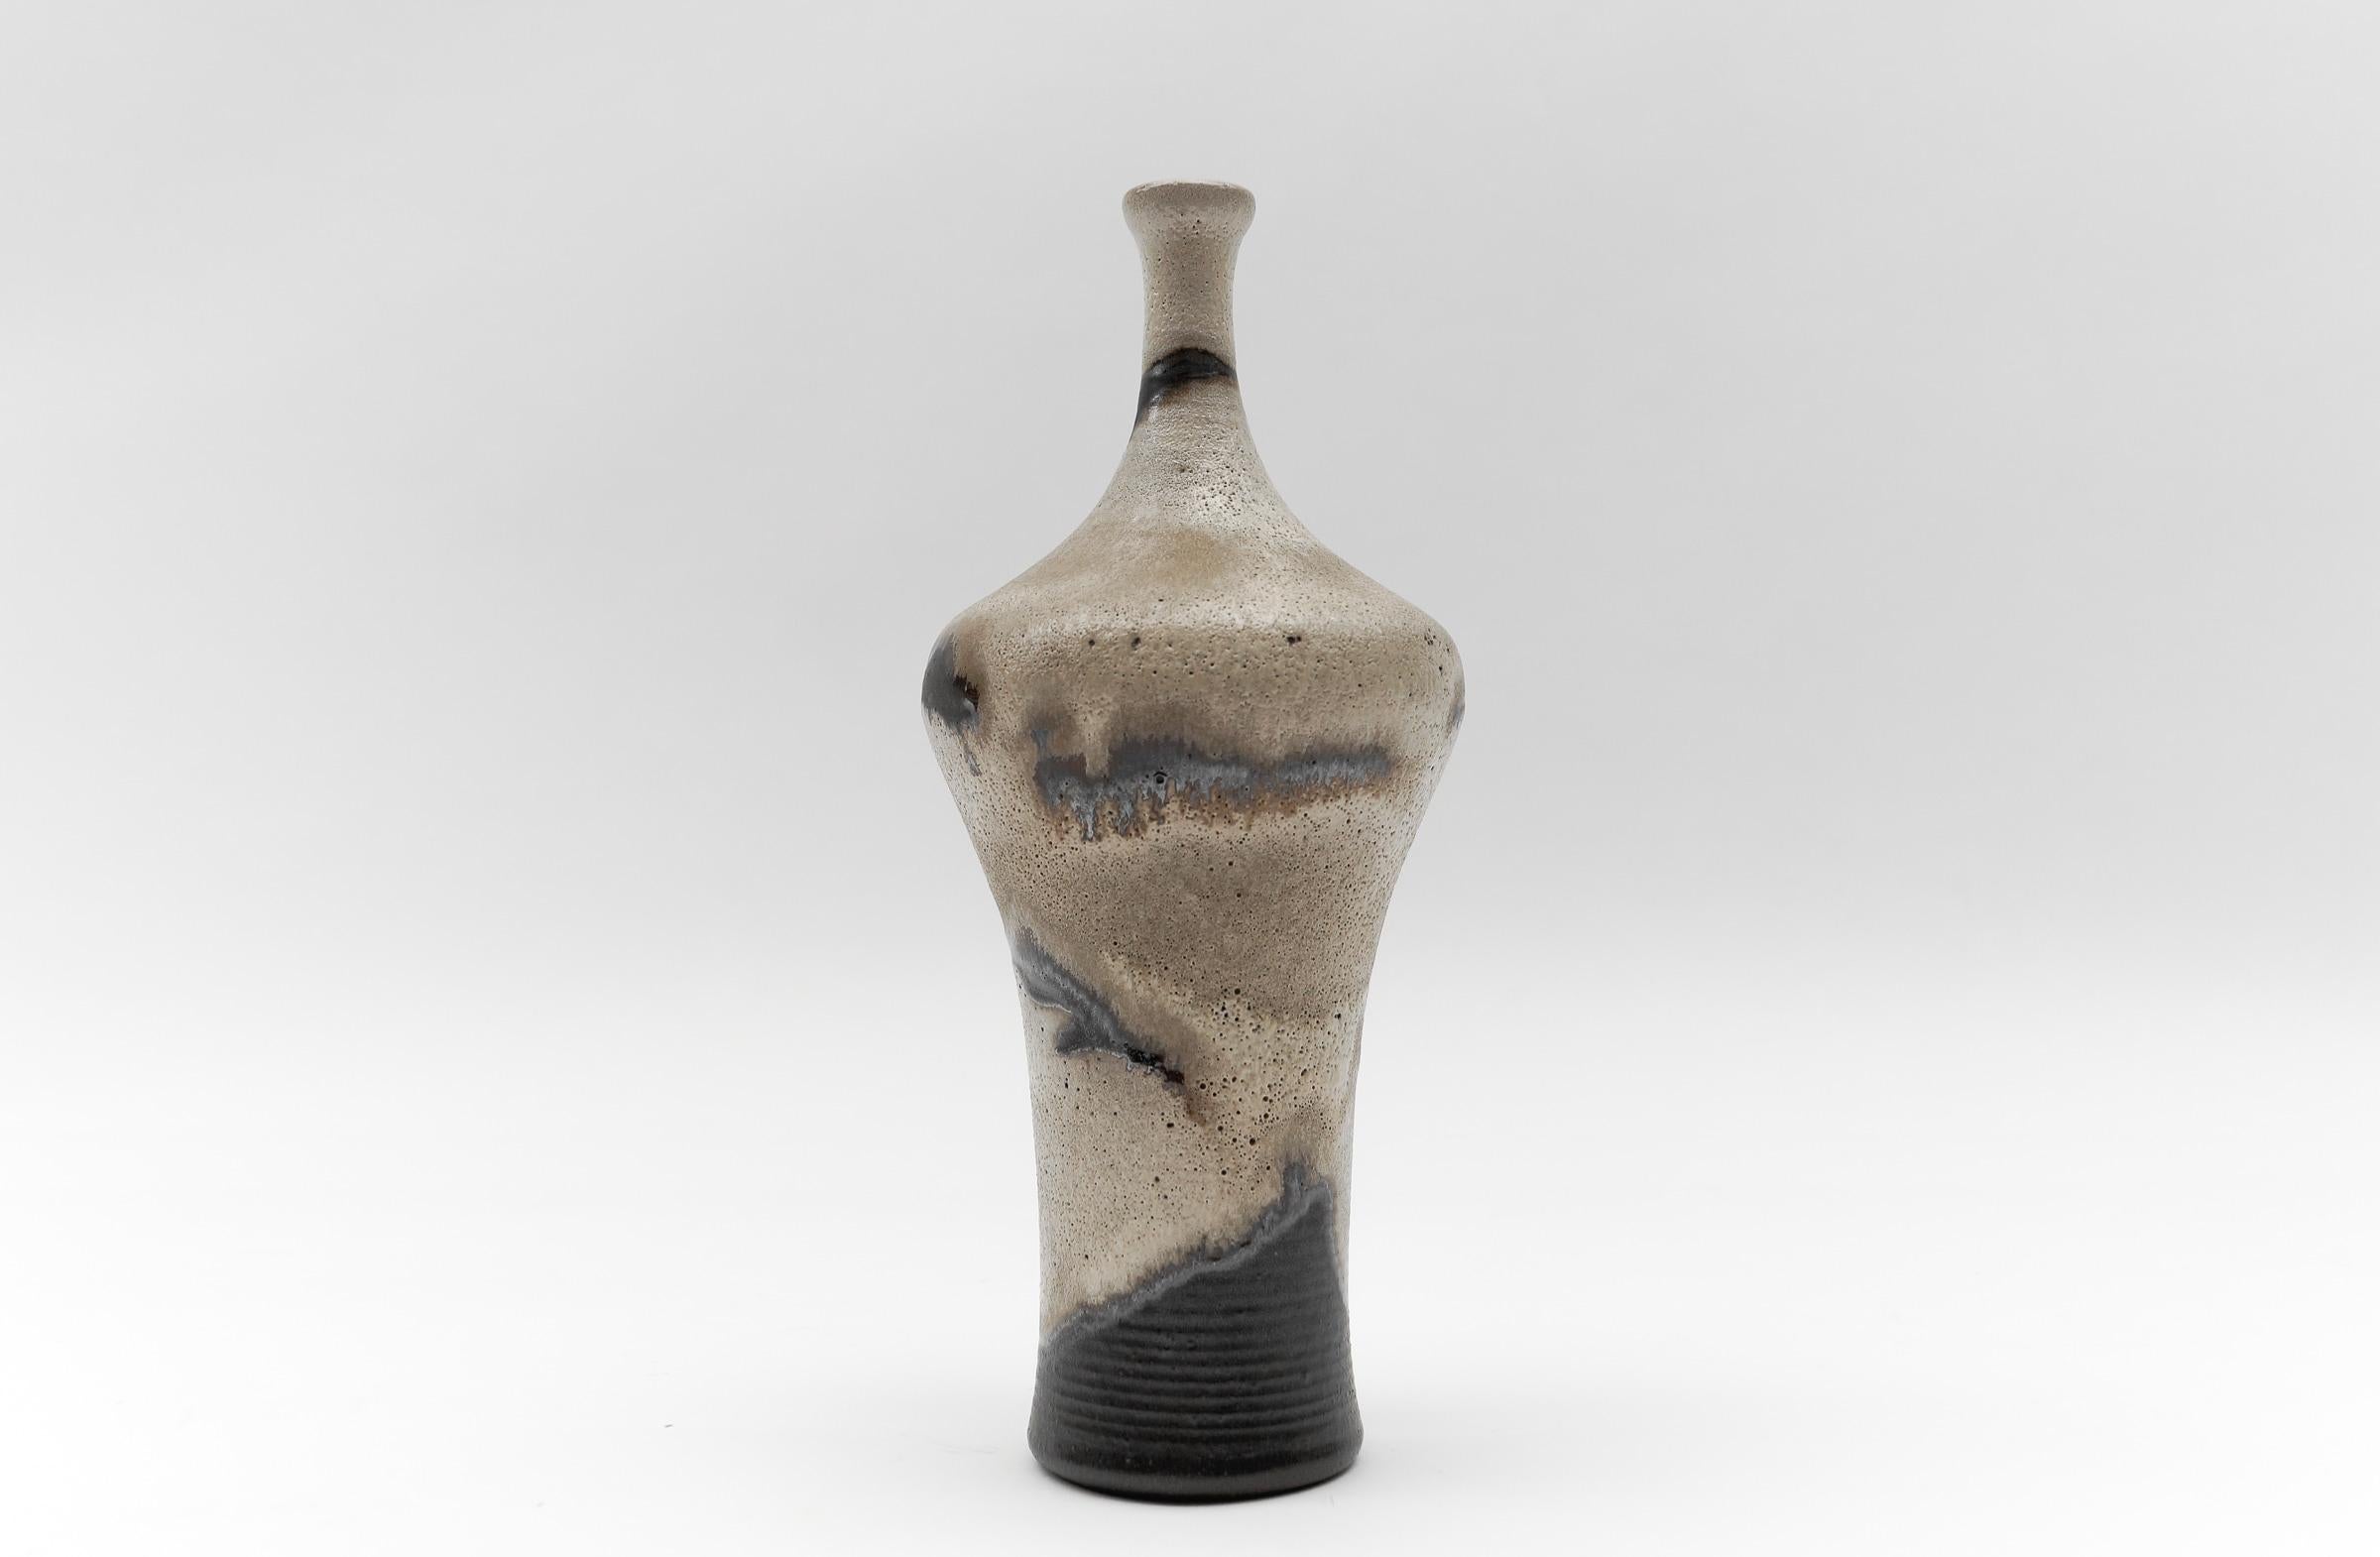 Mid-Century Modern Studio Ceramic Vase by Elly Kuch for Wilhelm & Elly KUCH, 1960s, Germany For Sale